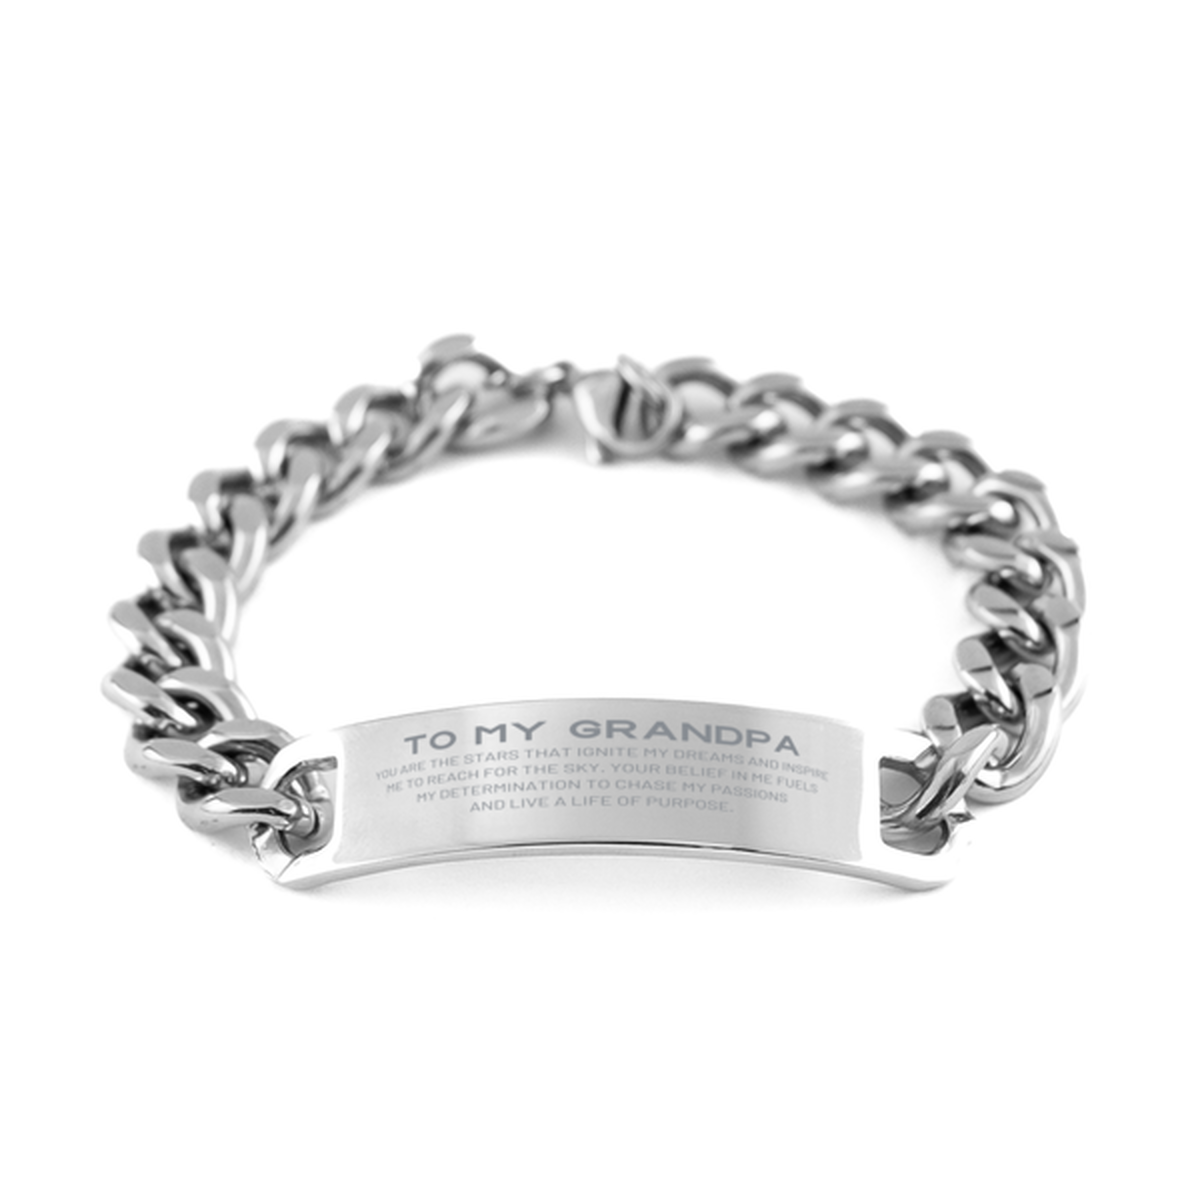 To My Grandpa Cuban Chain Stainless Steel Bracelet, You are the stars that ignite my dreams and inspire me to reach for the sky, Birthday Unique Gifts For Grandpa, Thank You Gifts For Grandpa